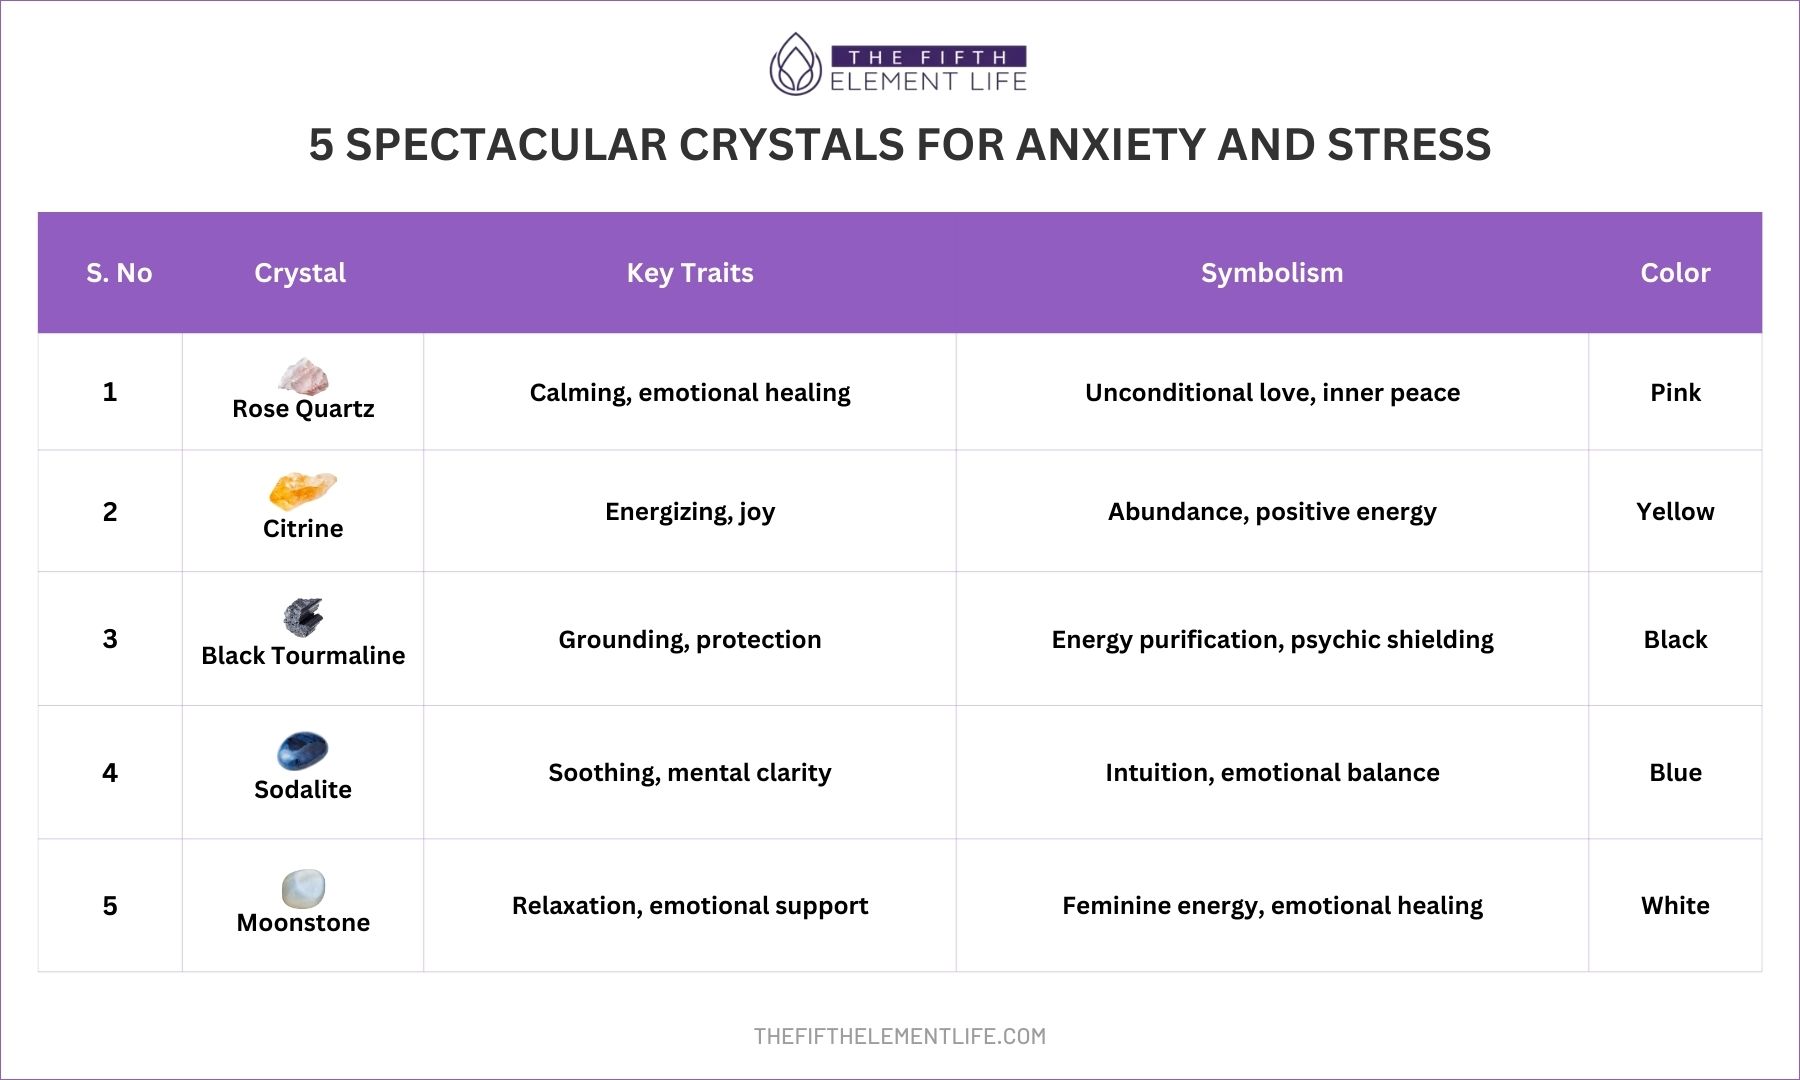 5 Spectacular Crystals For Anxiety And Stress